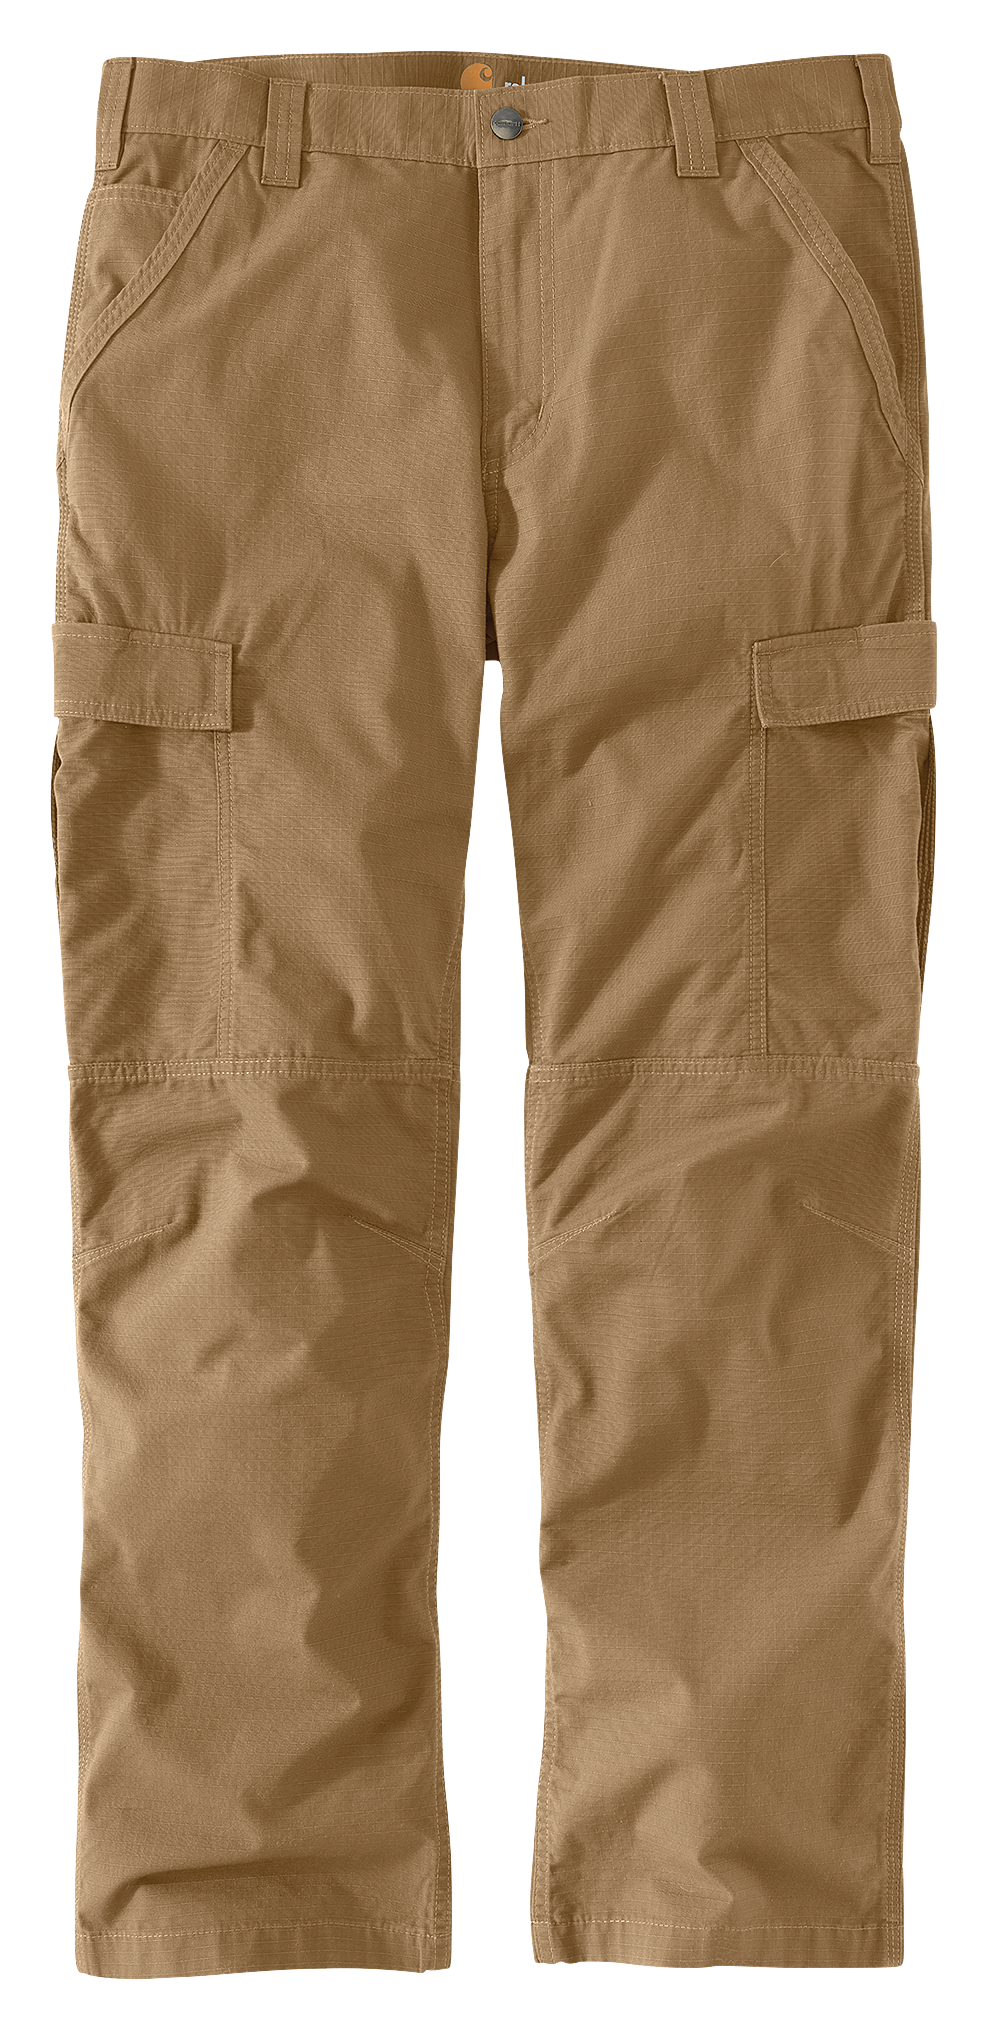 Men's Wrangler Free To Stretch Relaxed-Fit Ripstop Cargo Pants